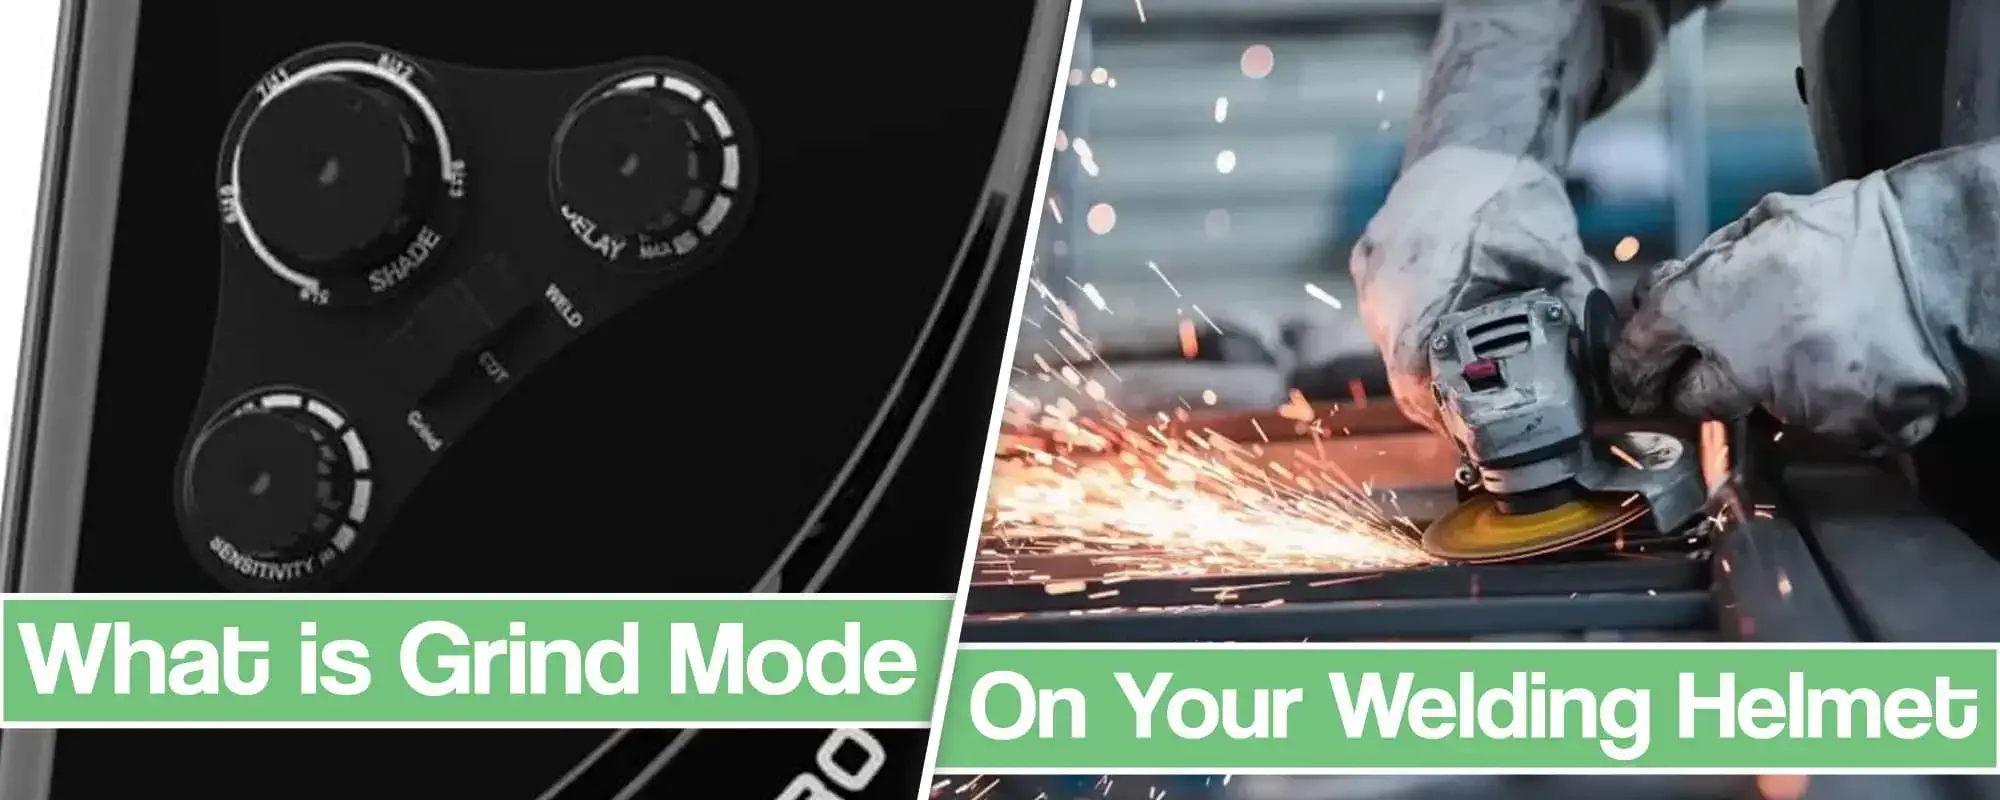 Feature image for Grind Mode On a Welding Helmet article